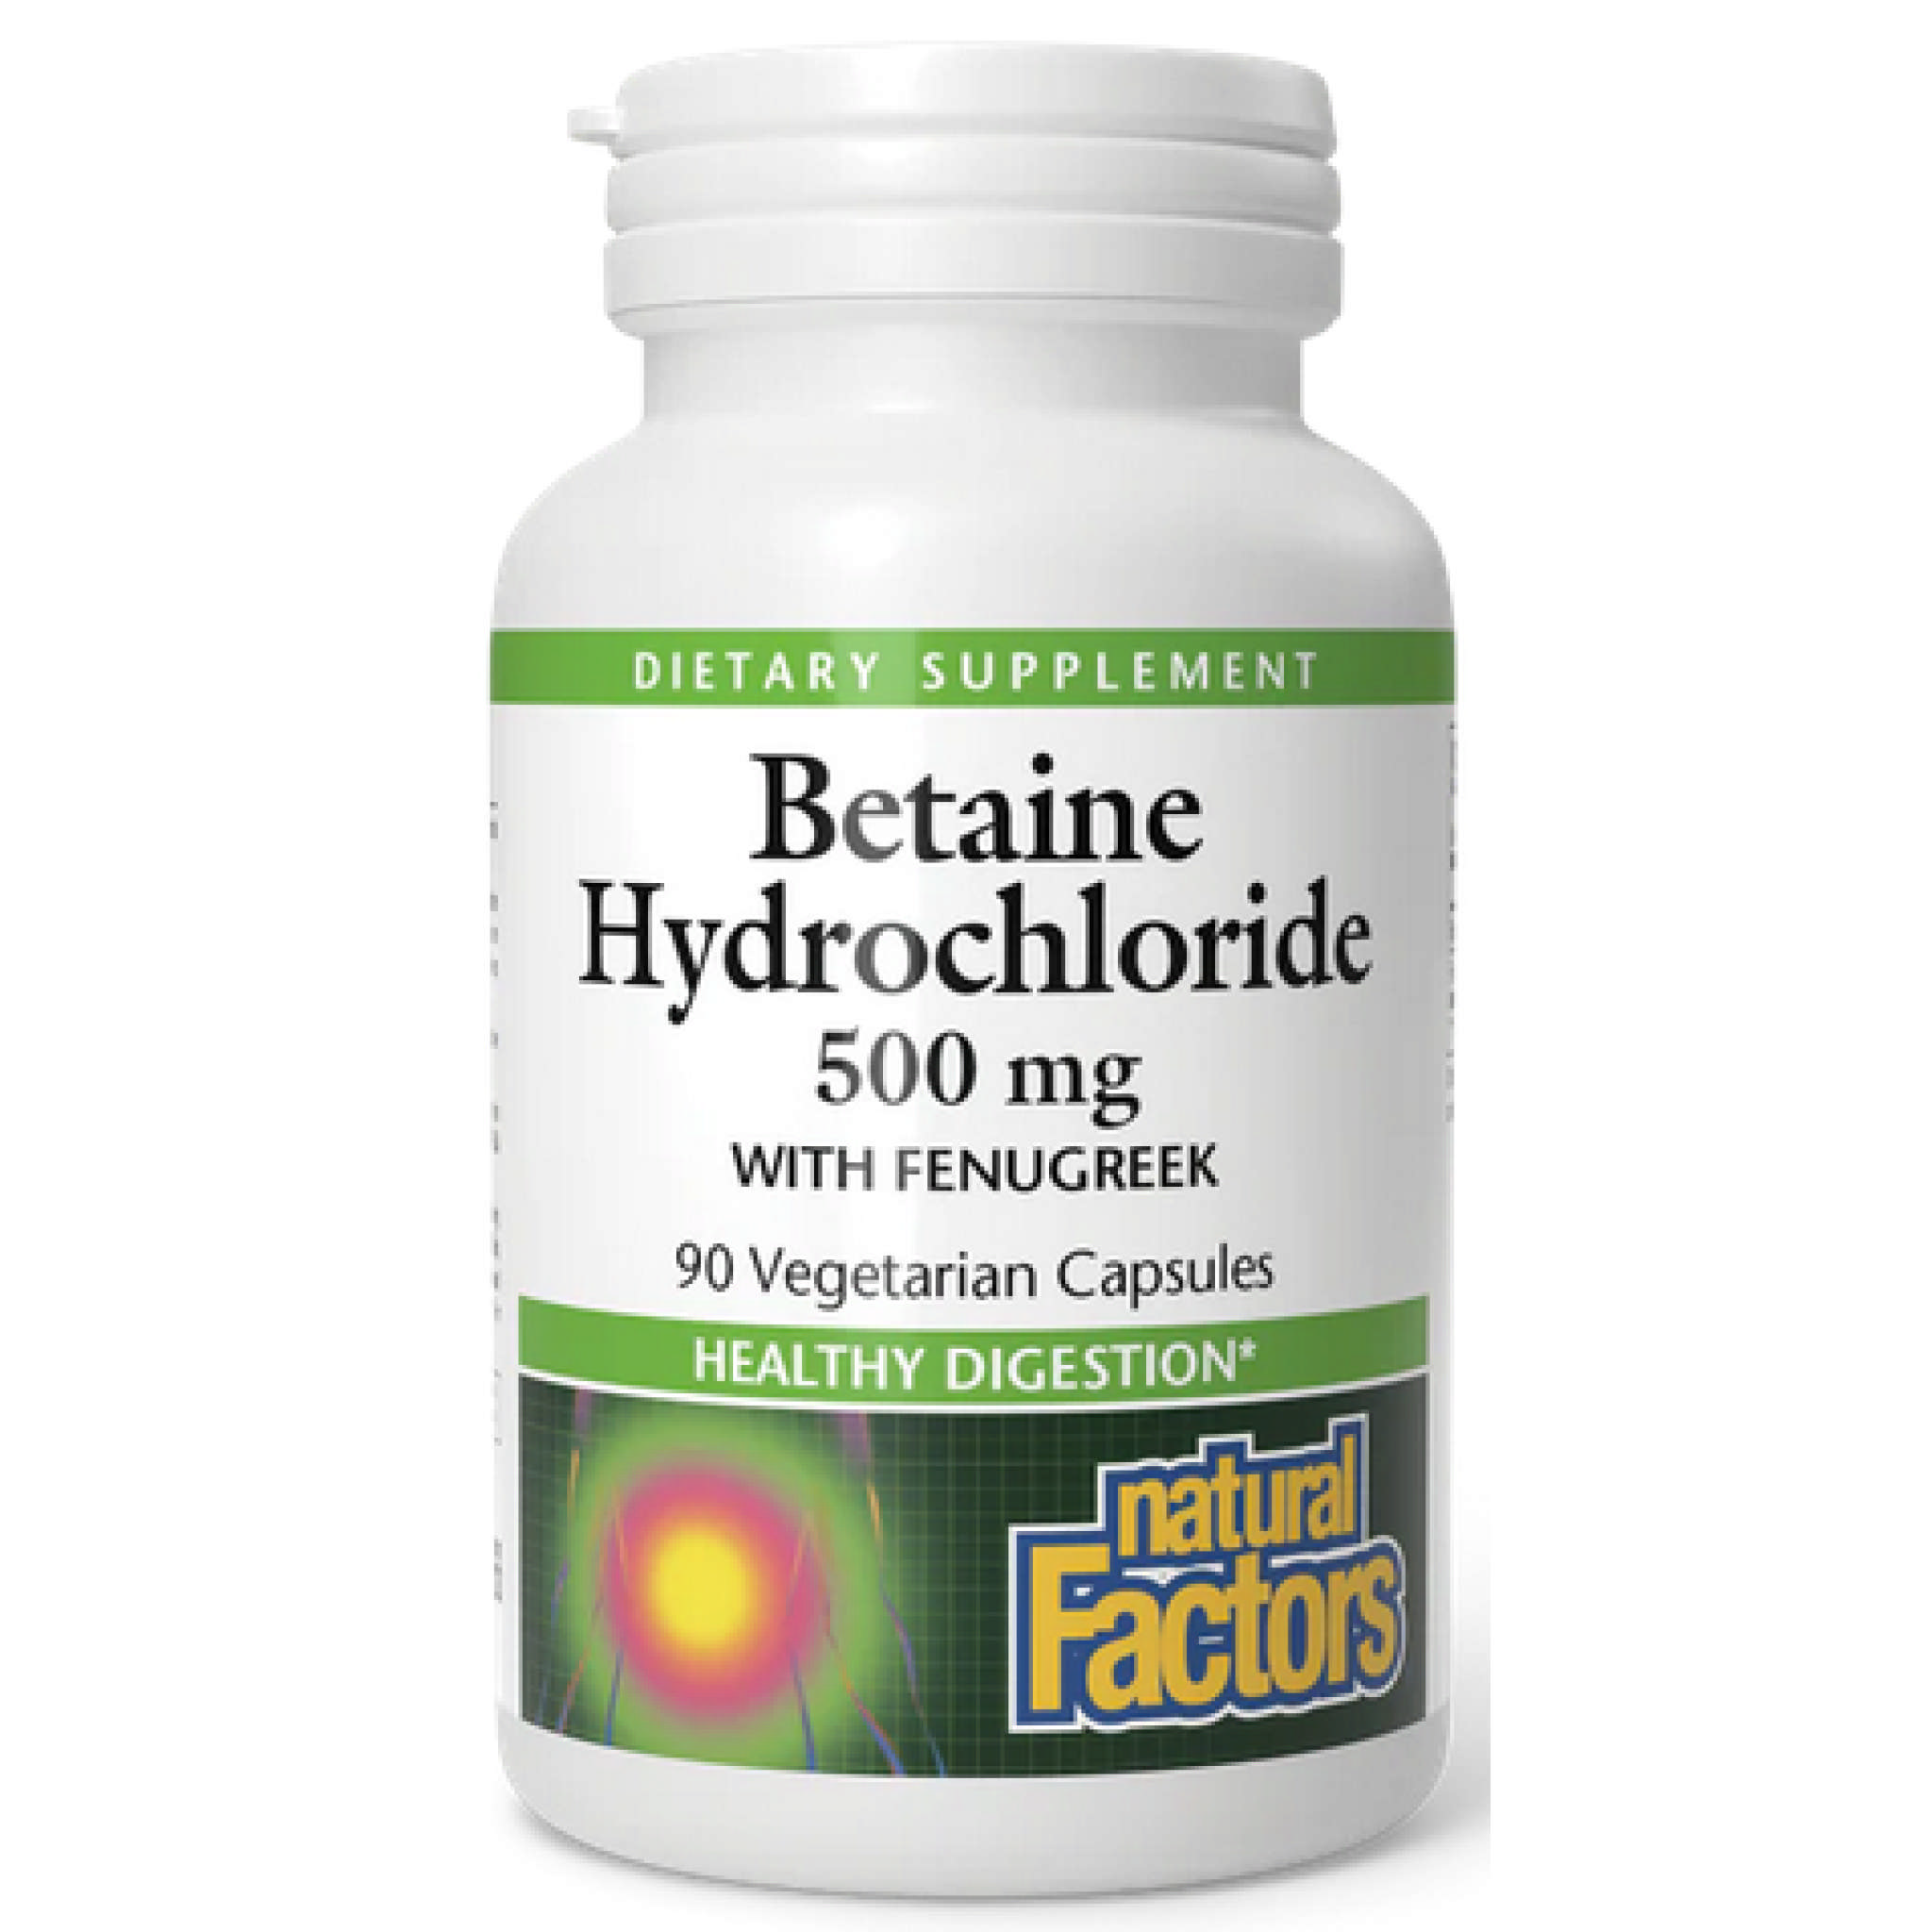 Natural Factors - Betaine Hydrochloride 500 mg